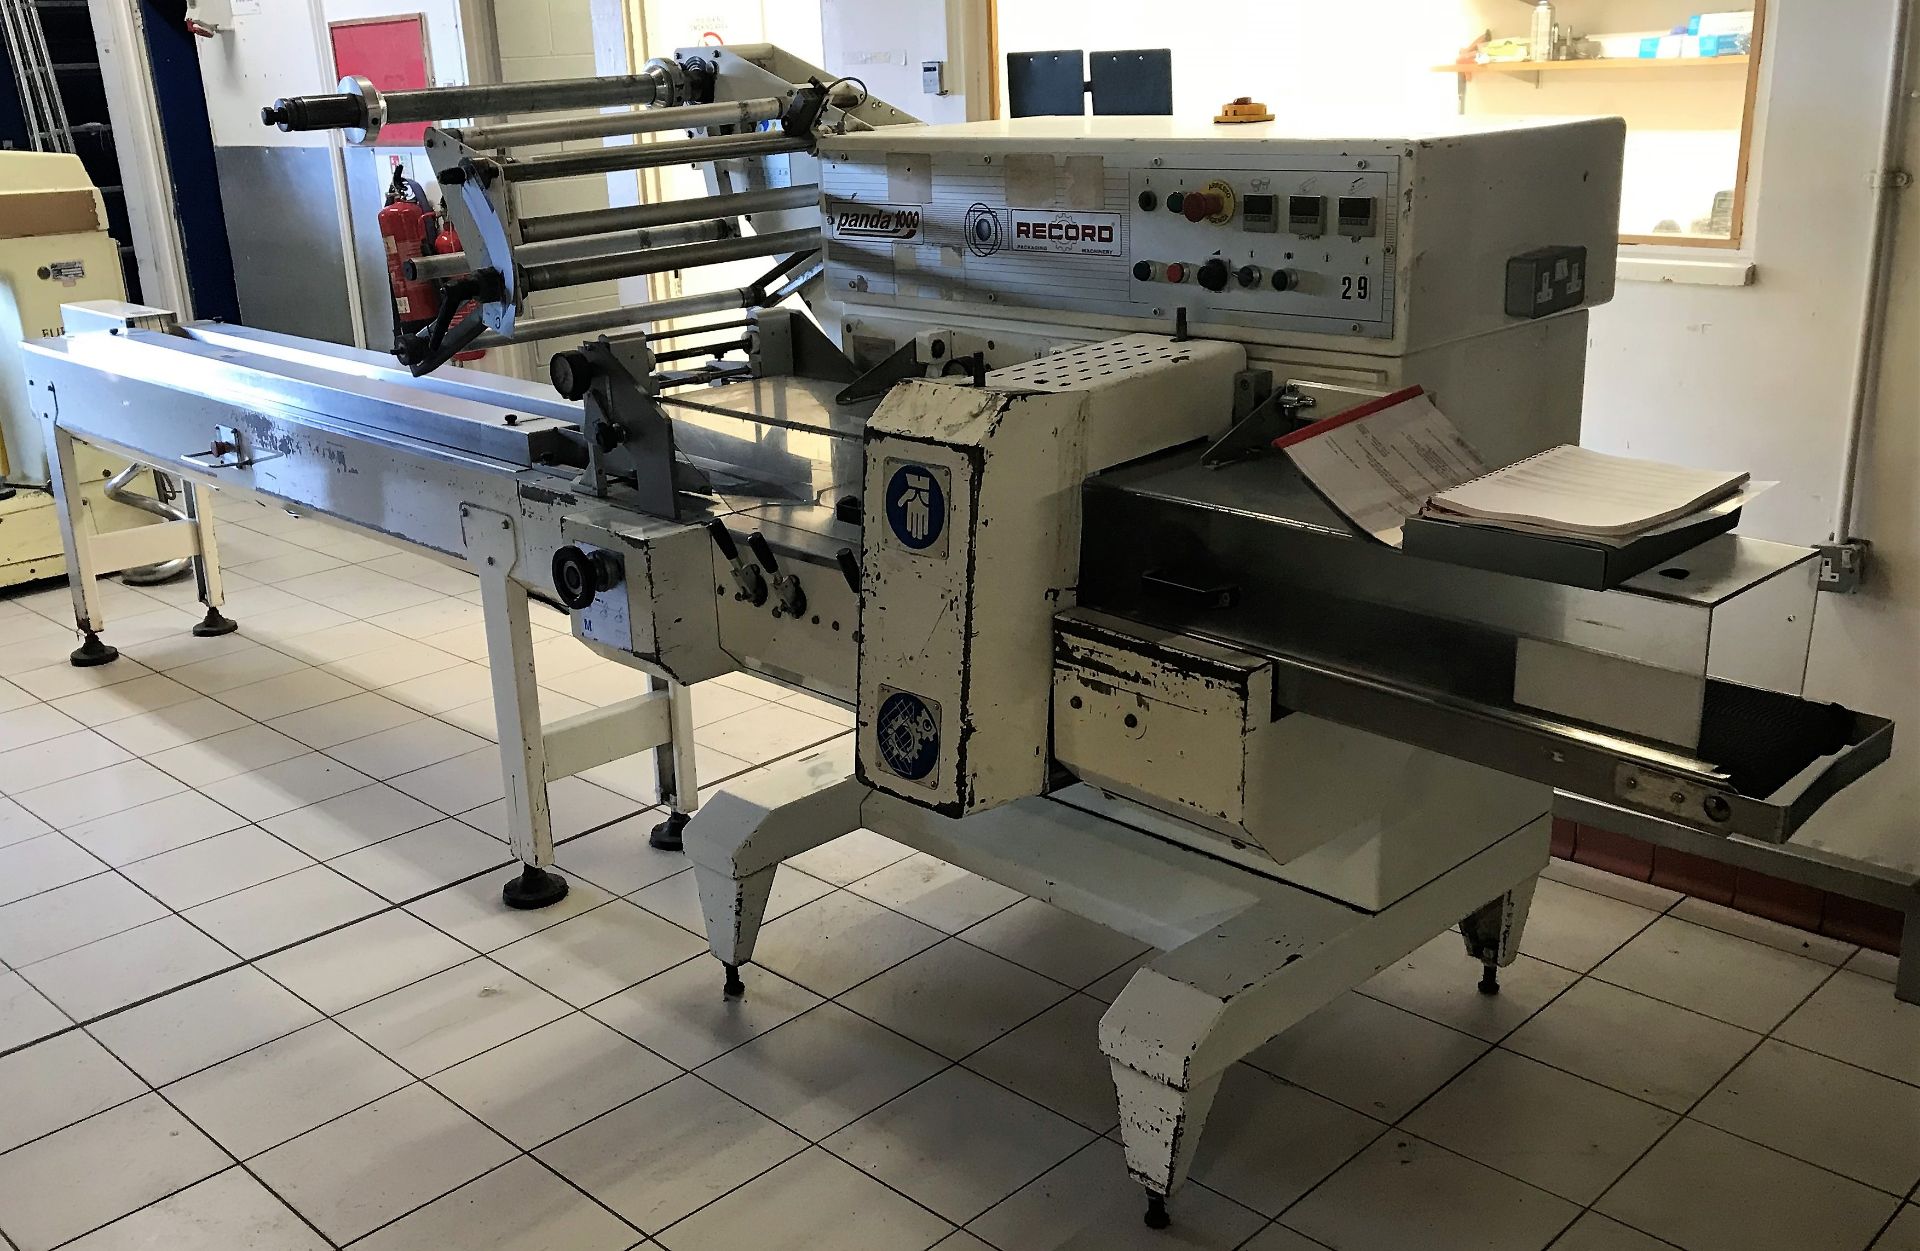 A Record Panda 1000 Flow Wrapping Machine No.03-95-097 (1996), 3ph-plug in; infeed 200mm x 850mm, - Image 3 of 8